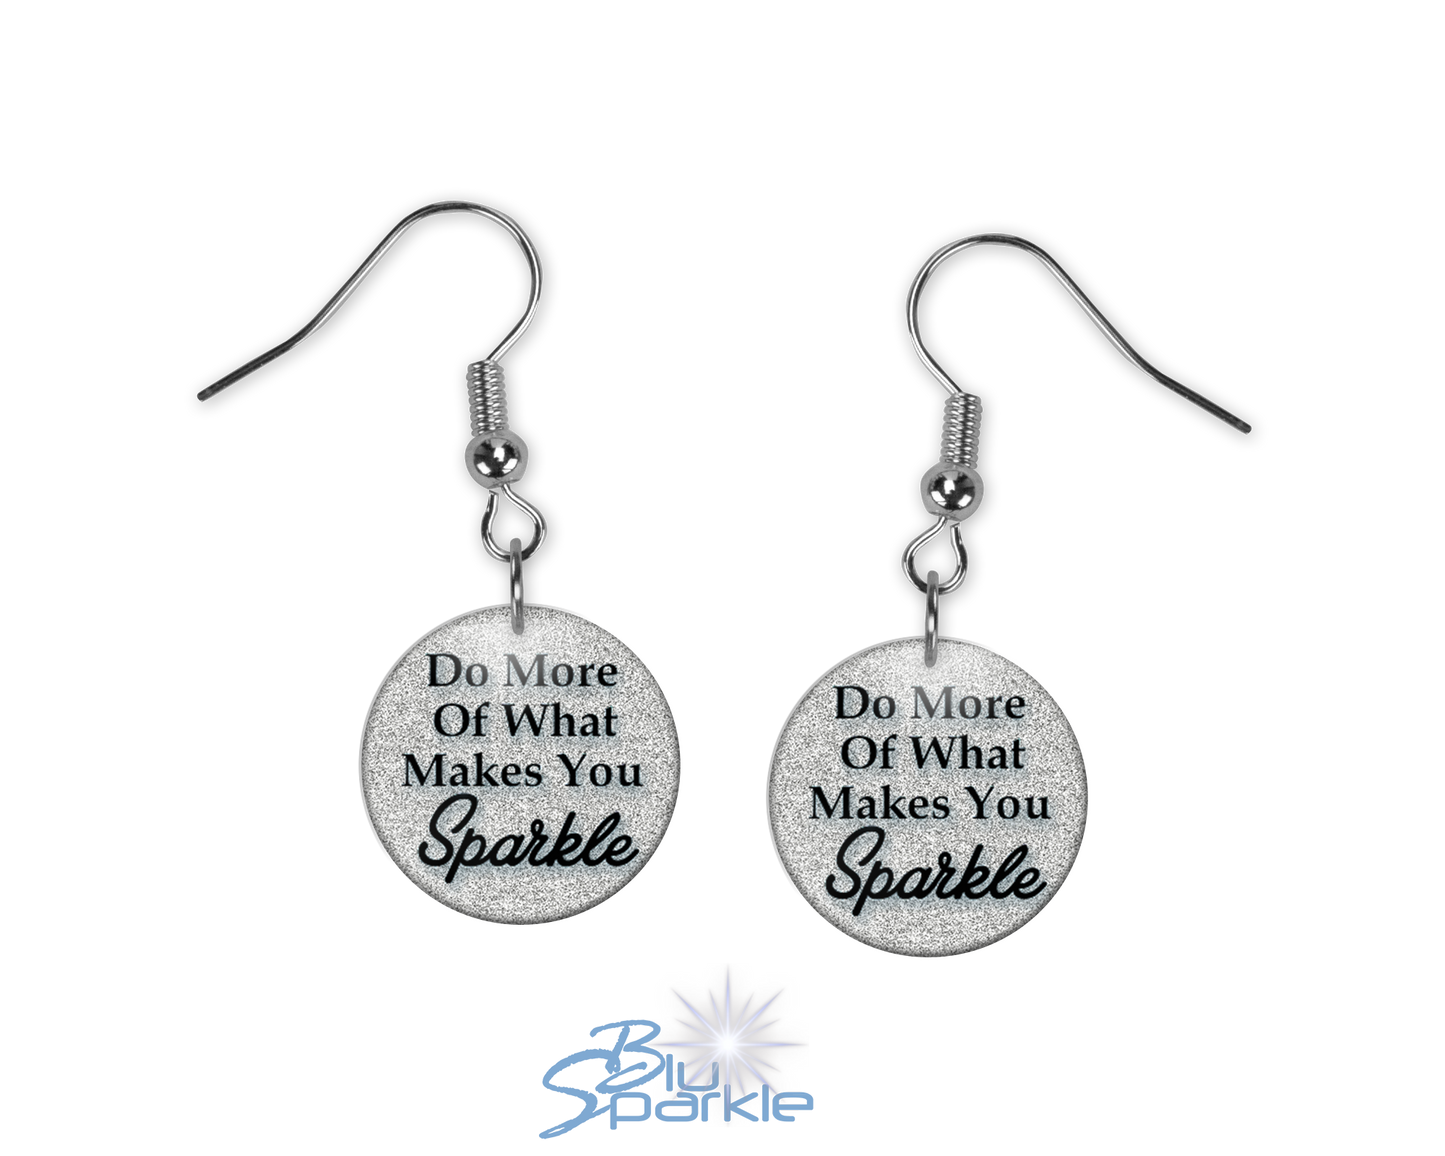 Do More Of What Makes You Sparkle - Earrings